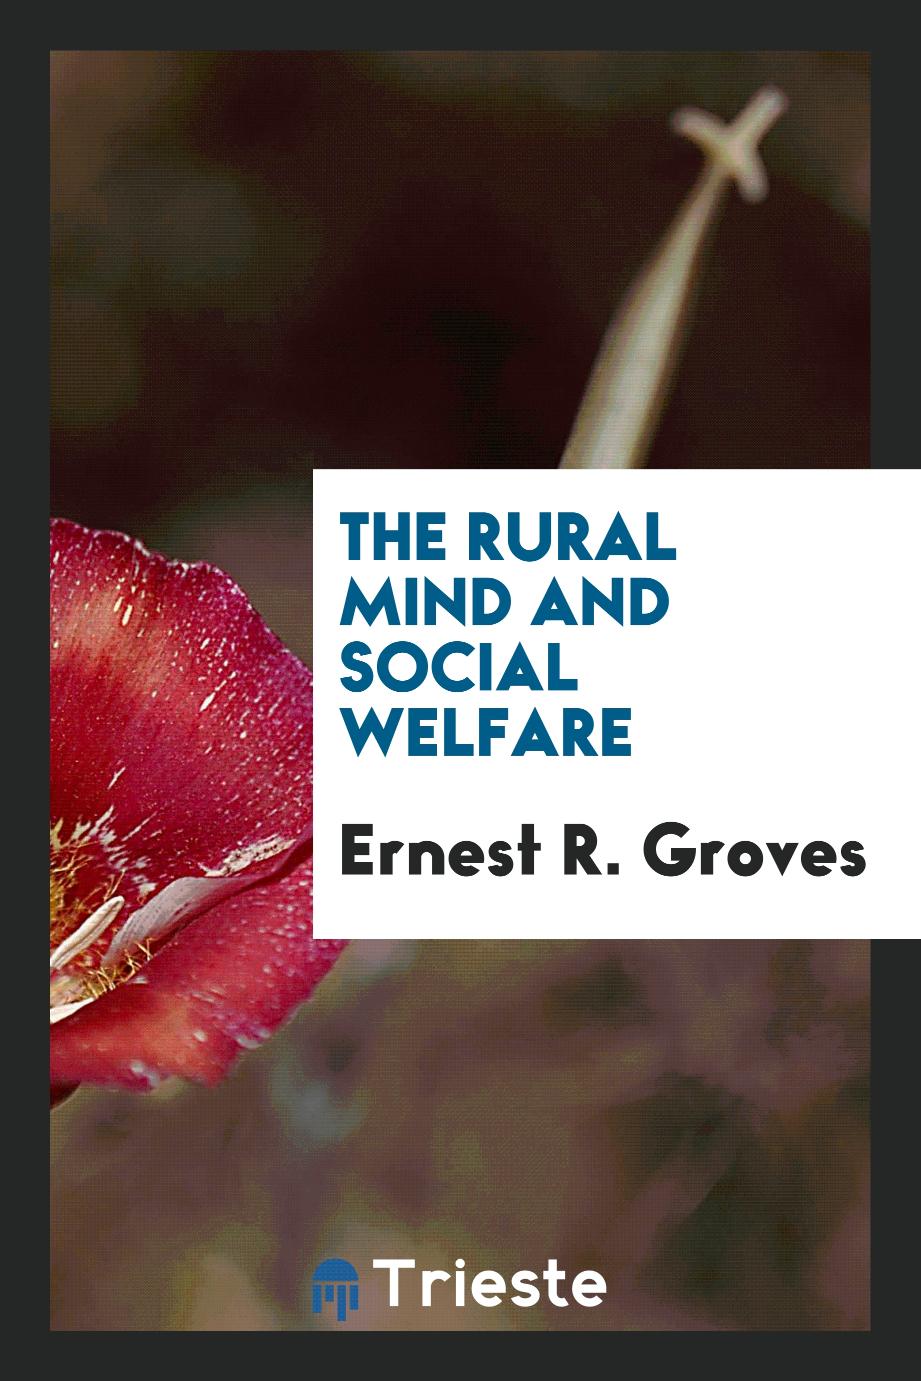 The rural mind and social welfare